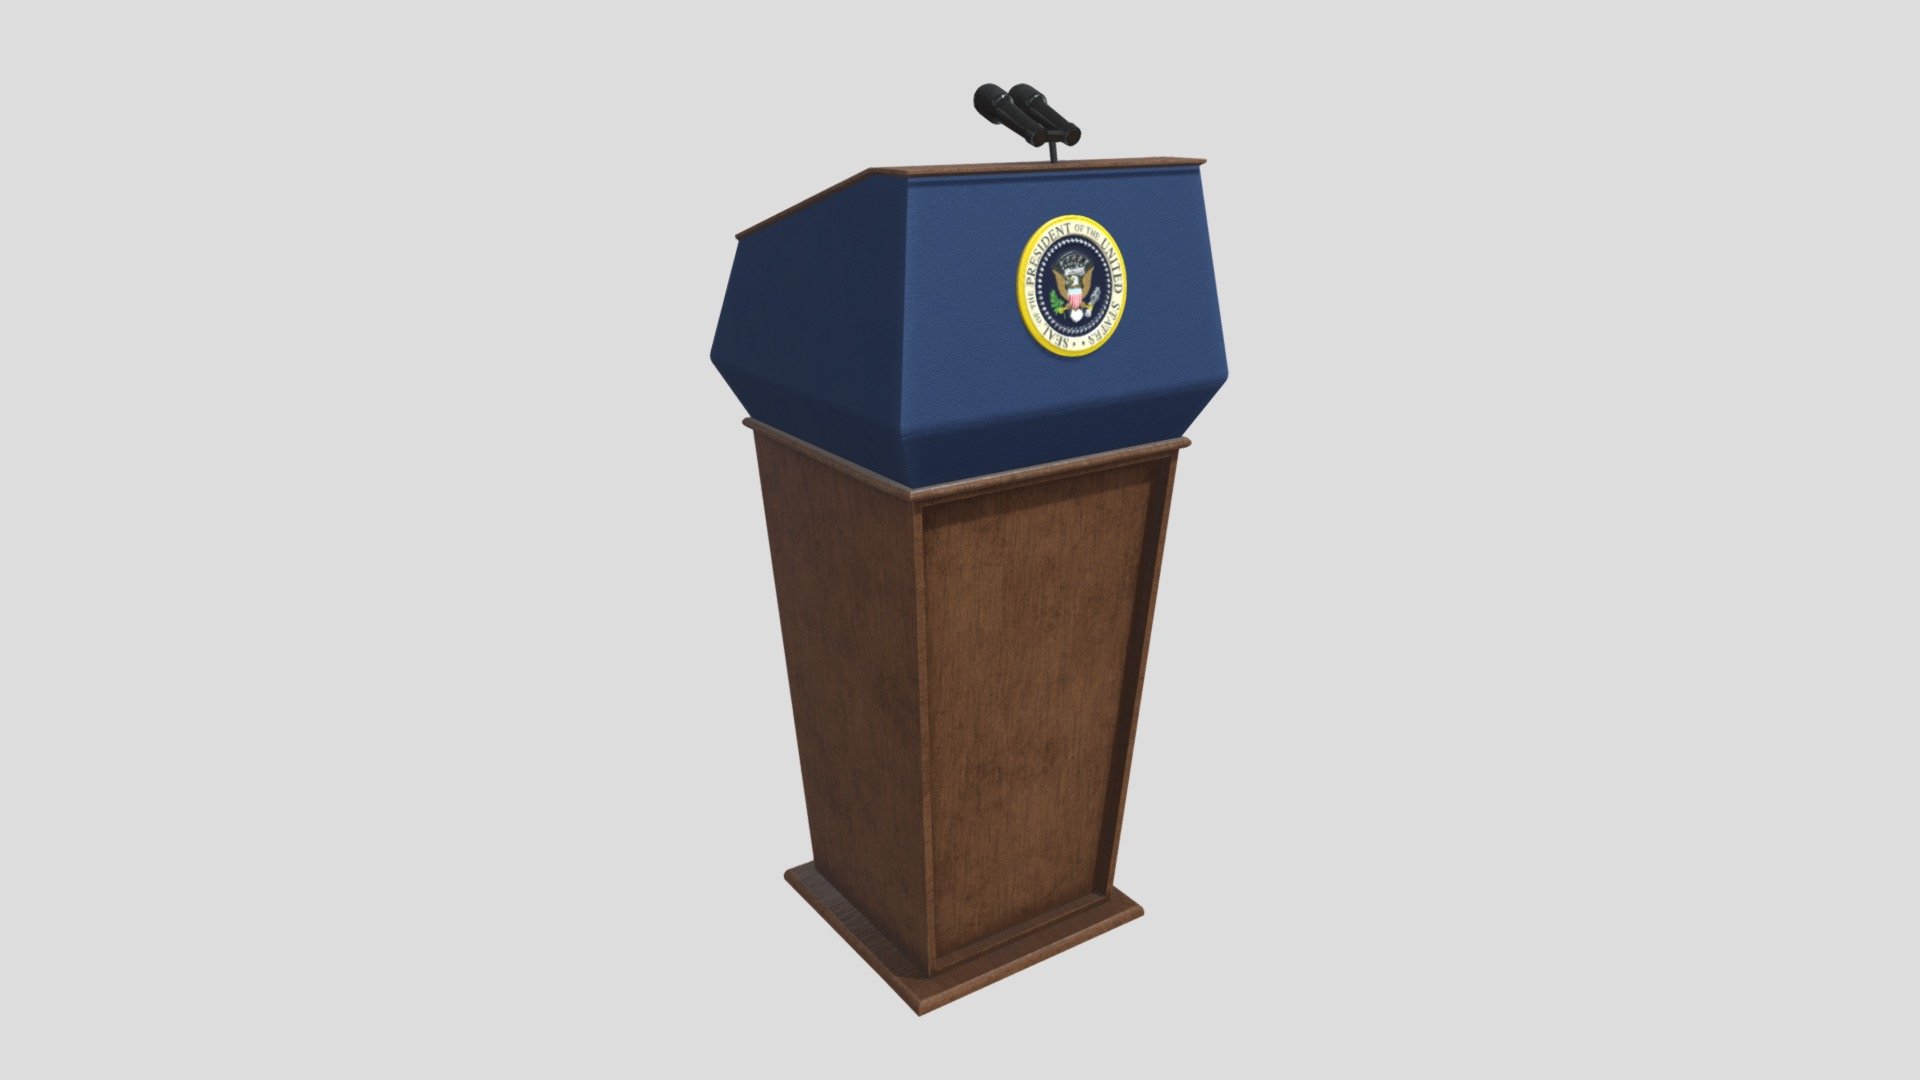 This presidential podium is perfect for any political scene, The model is lowpoly except the presidential seal but can easily be replaced and UV mapped to a low poly cylinder, The mesh is viewable from all angles and distances,

This includes:

The mesh
4K and 2K Texture Set (Albedo, Roughness, Normal, Height)
The mesh is UV unwrapped with vertex colors and can easily be retextured 3d model